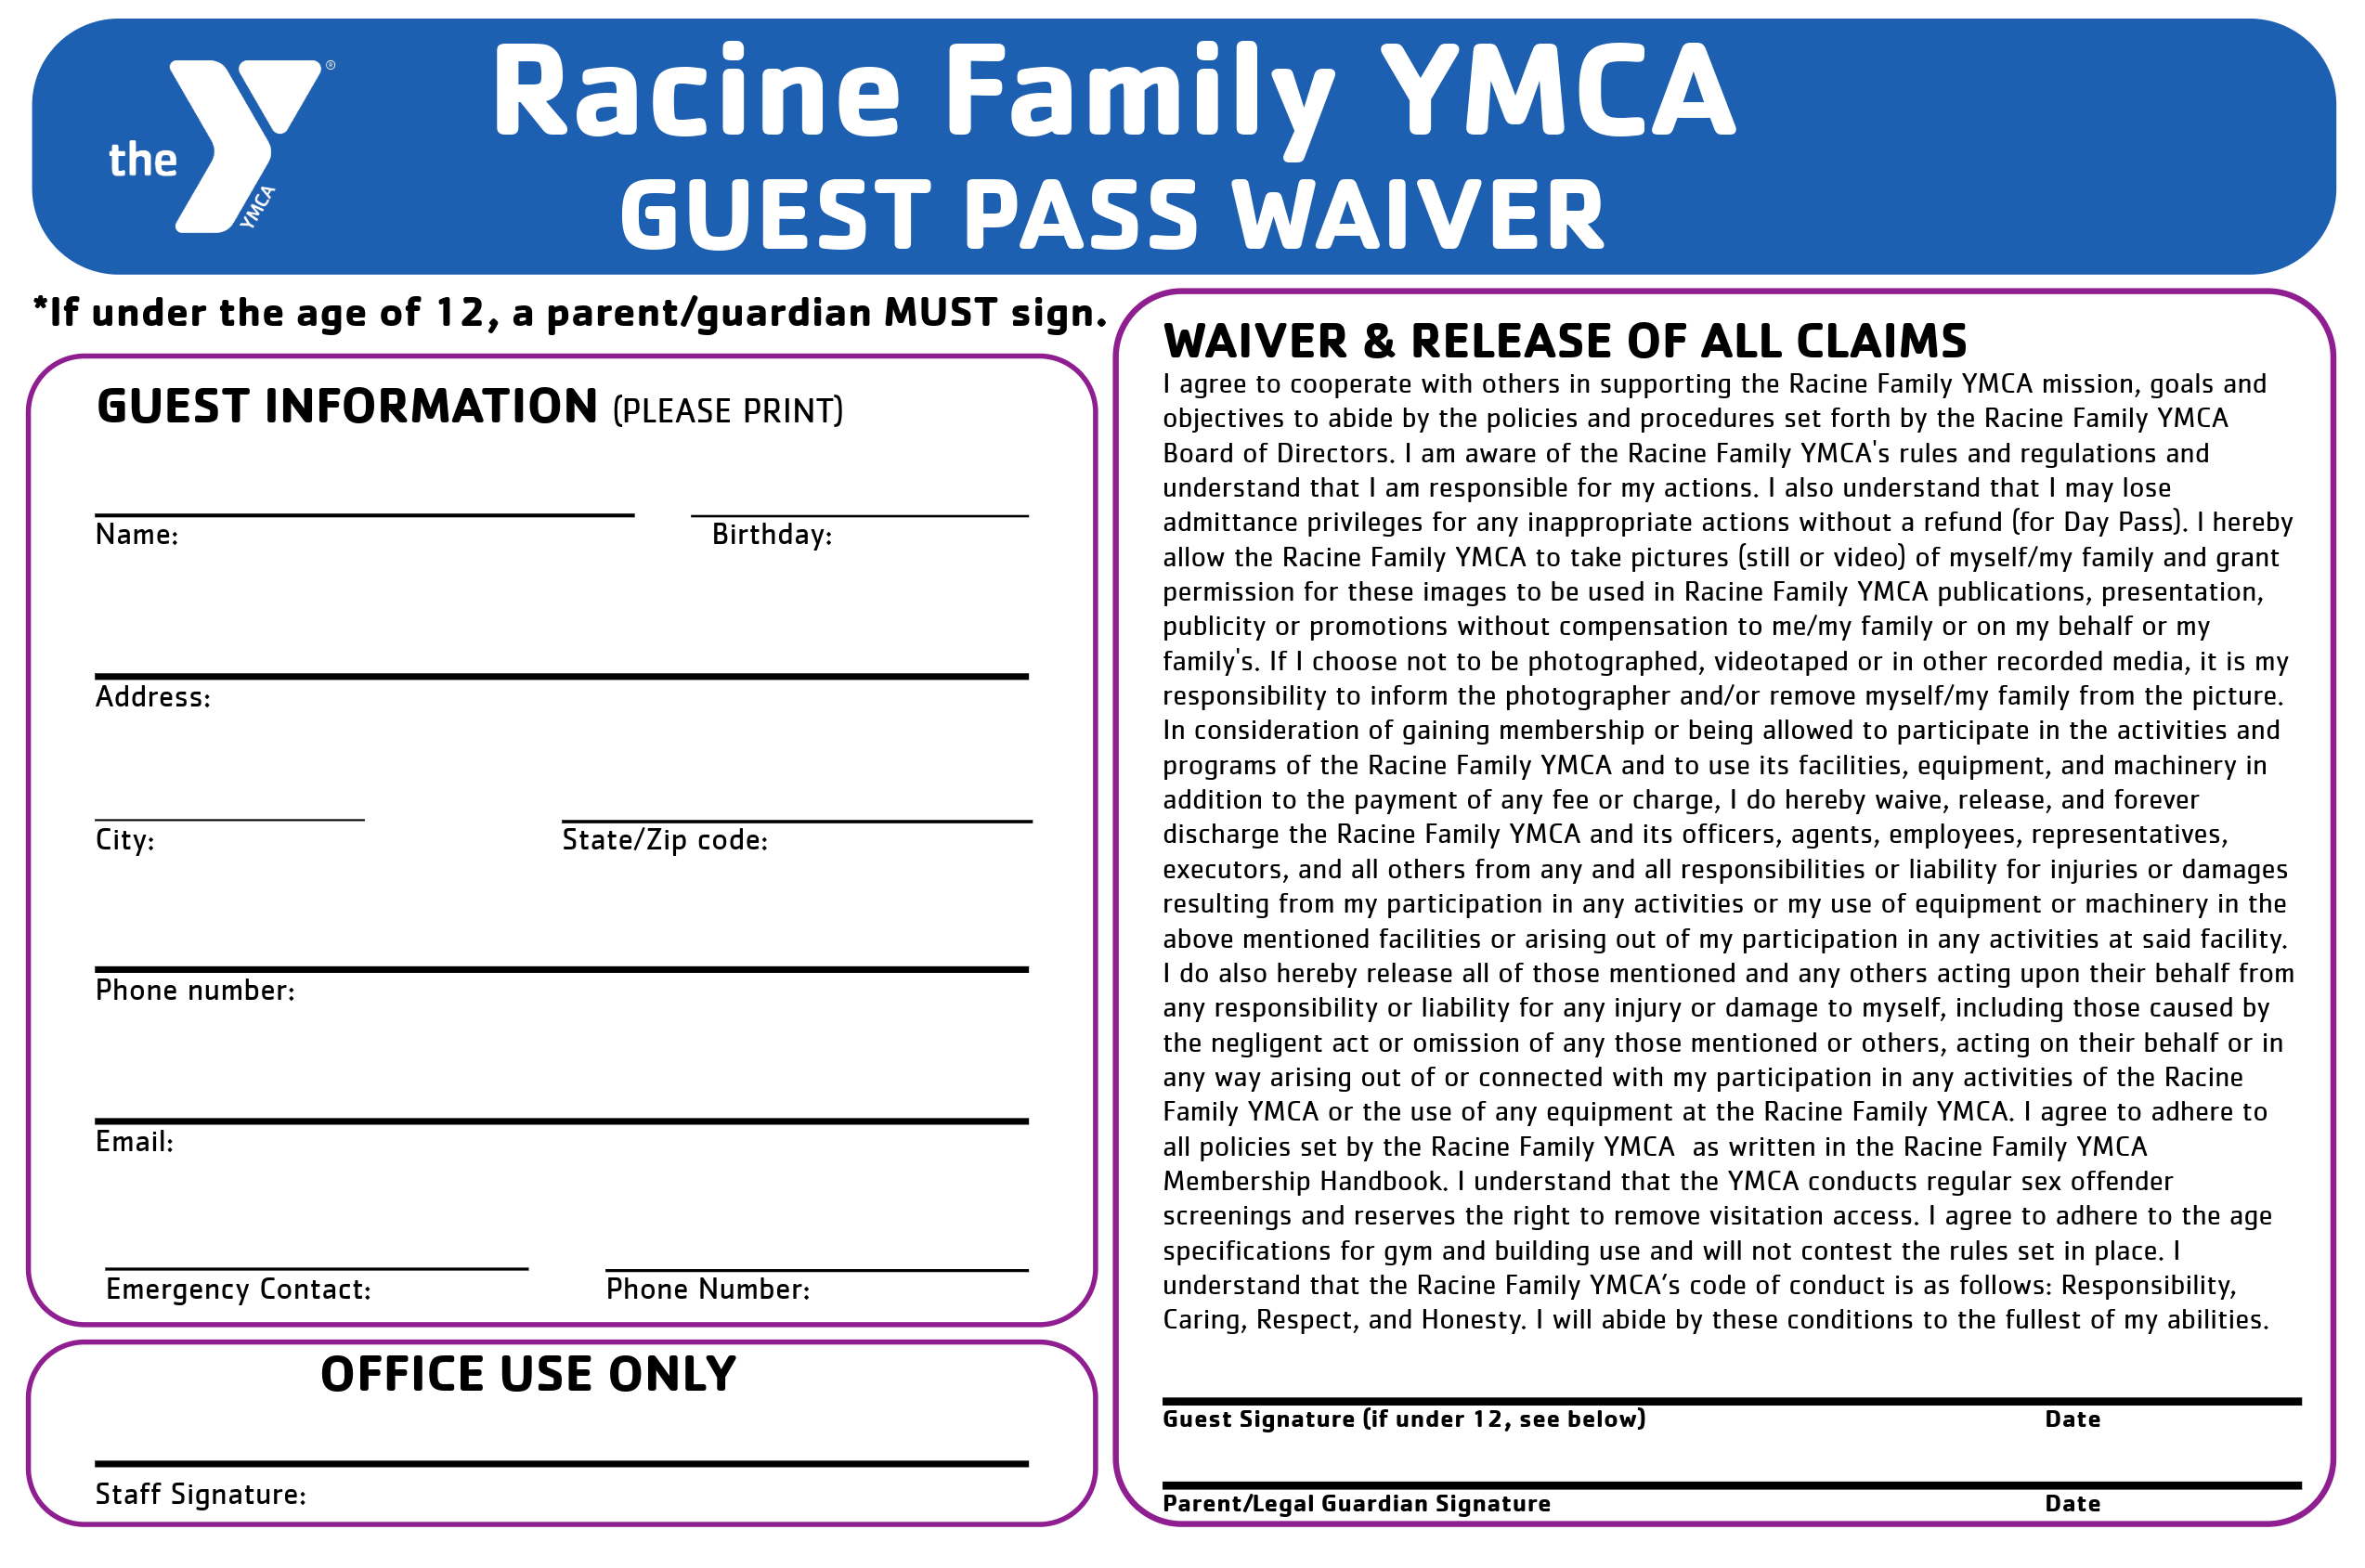 guest waiver